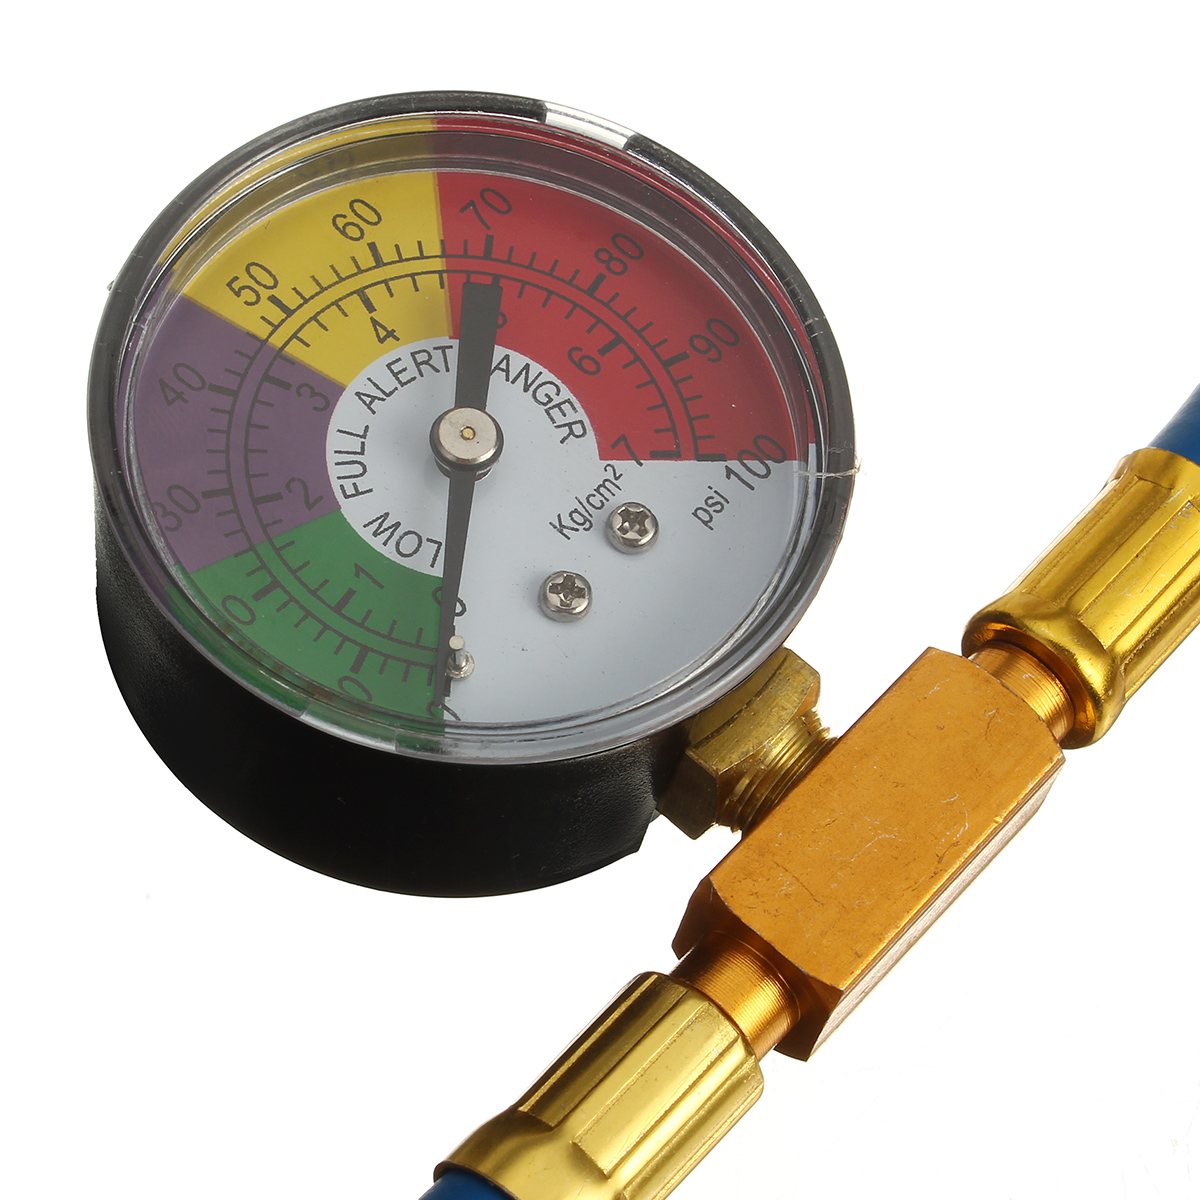 100psi-Air-Conditioning-Recharge-Hose-with-Pressure-Gauge-AC-R134A-12-Inch-Refrigerant-Recharge-Meas-1701031-10